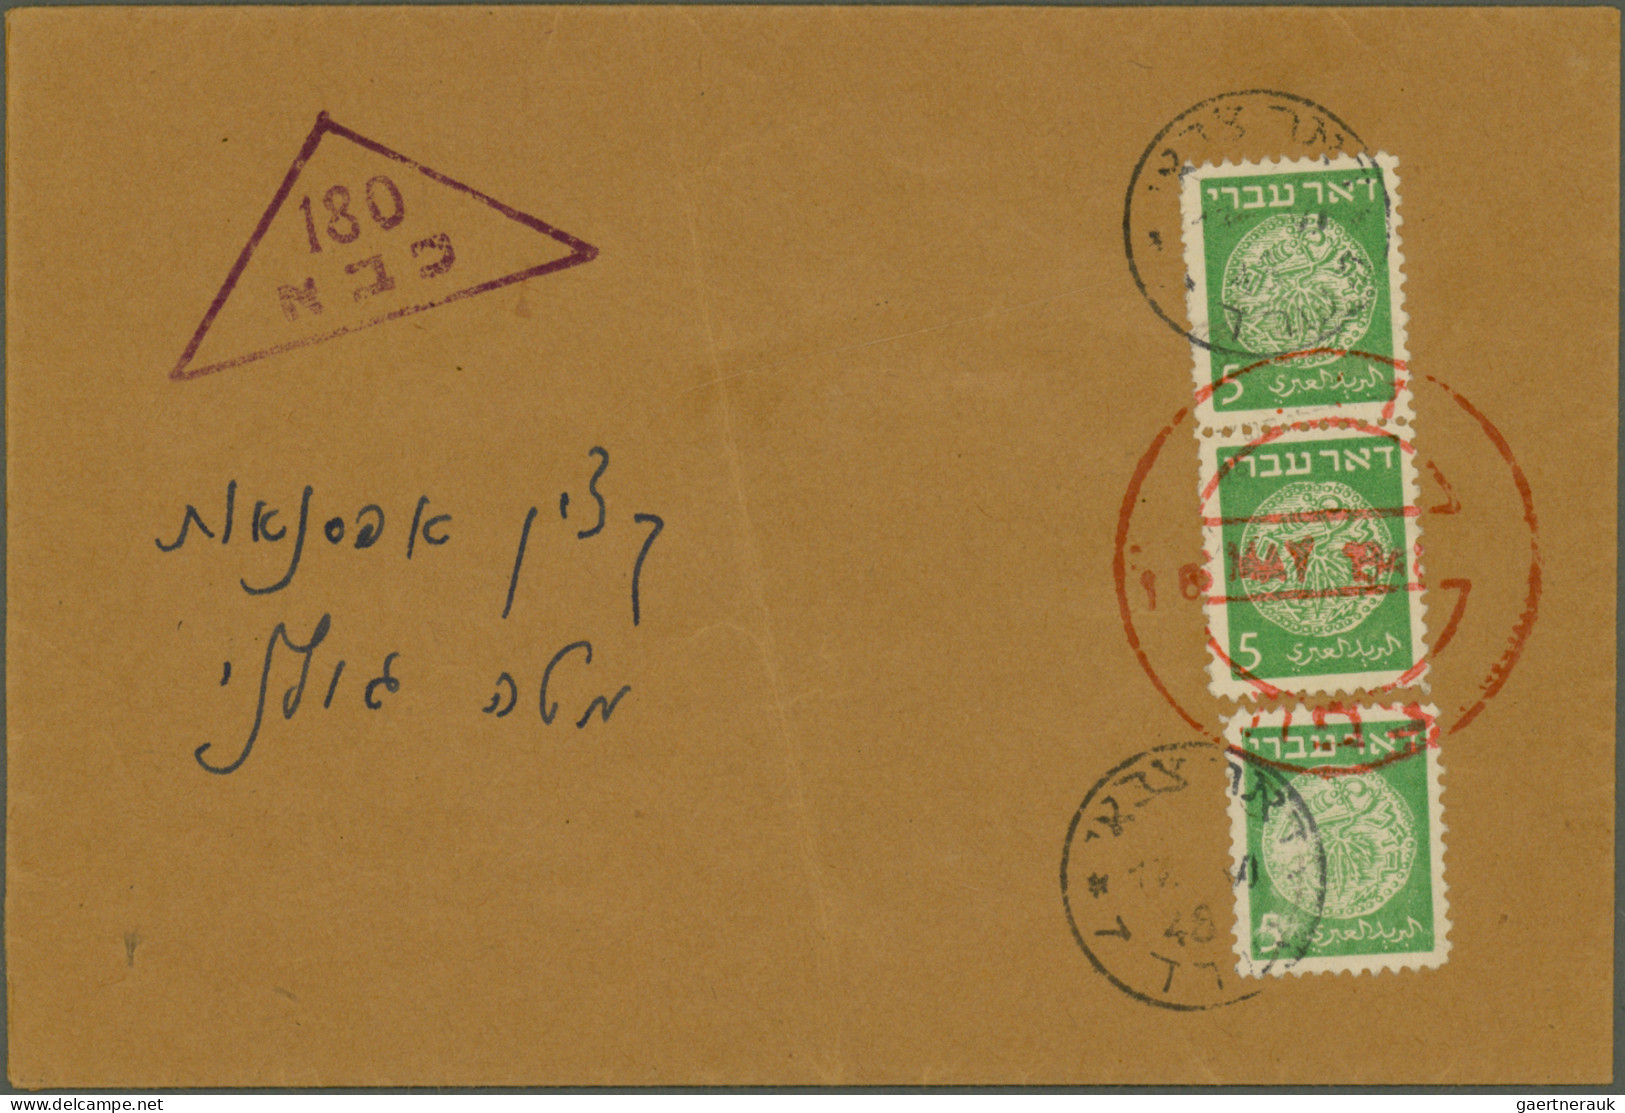 Israel: 1949/1959, holding of apprx 210 covers/cards/used stationeries, comprisi